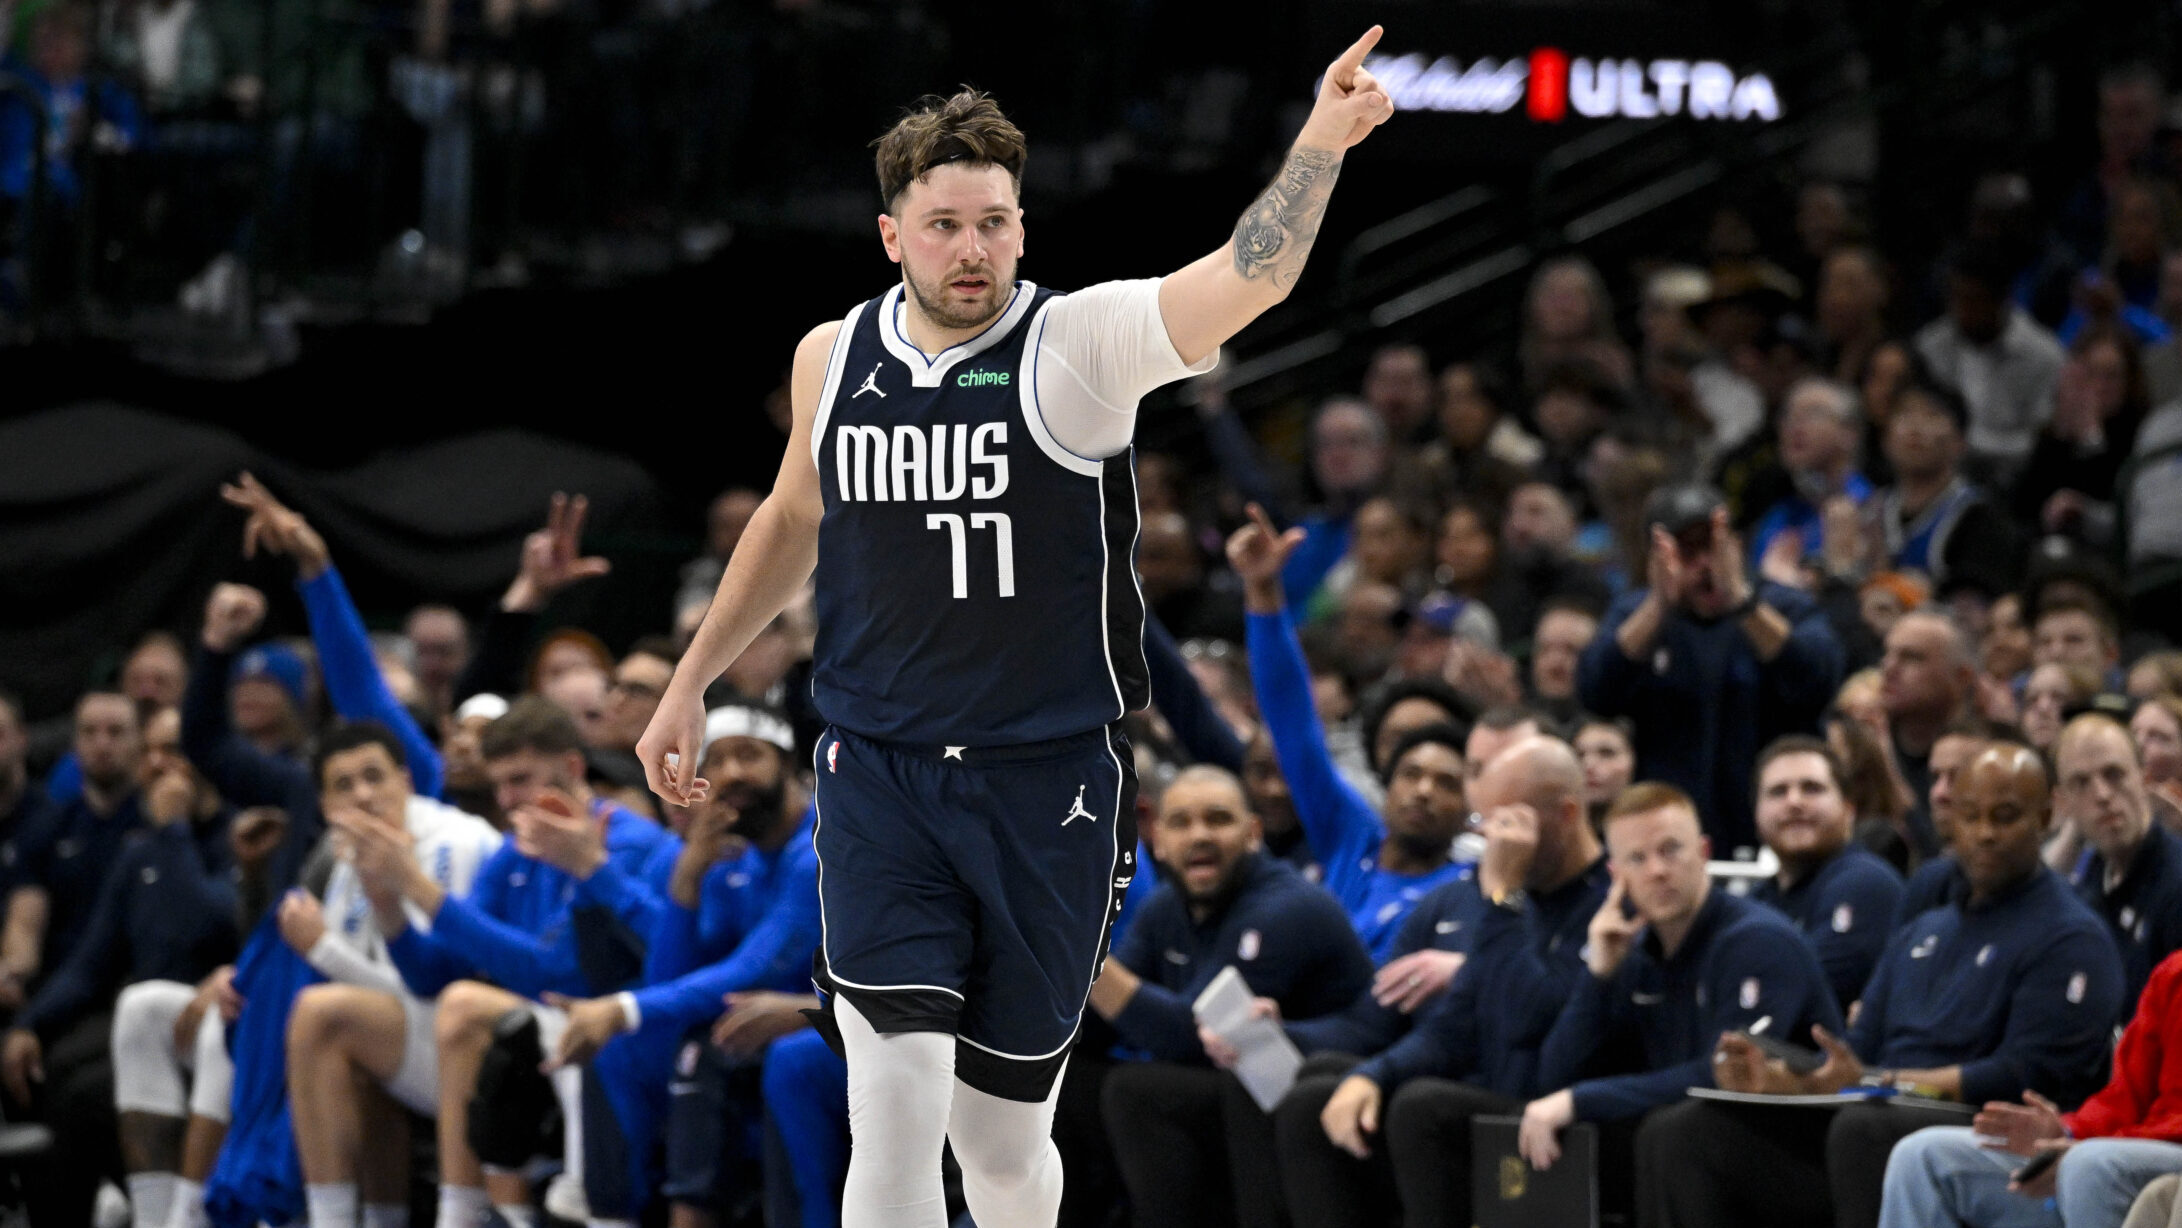 Has Embiid’s Injury Opened up the NBA MVP Race for Luka Doncic?